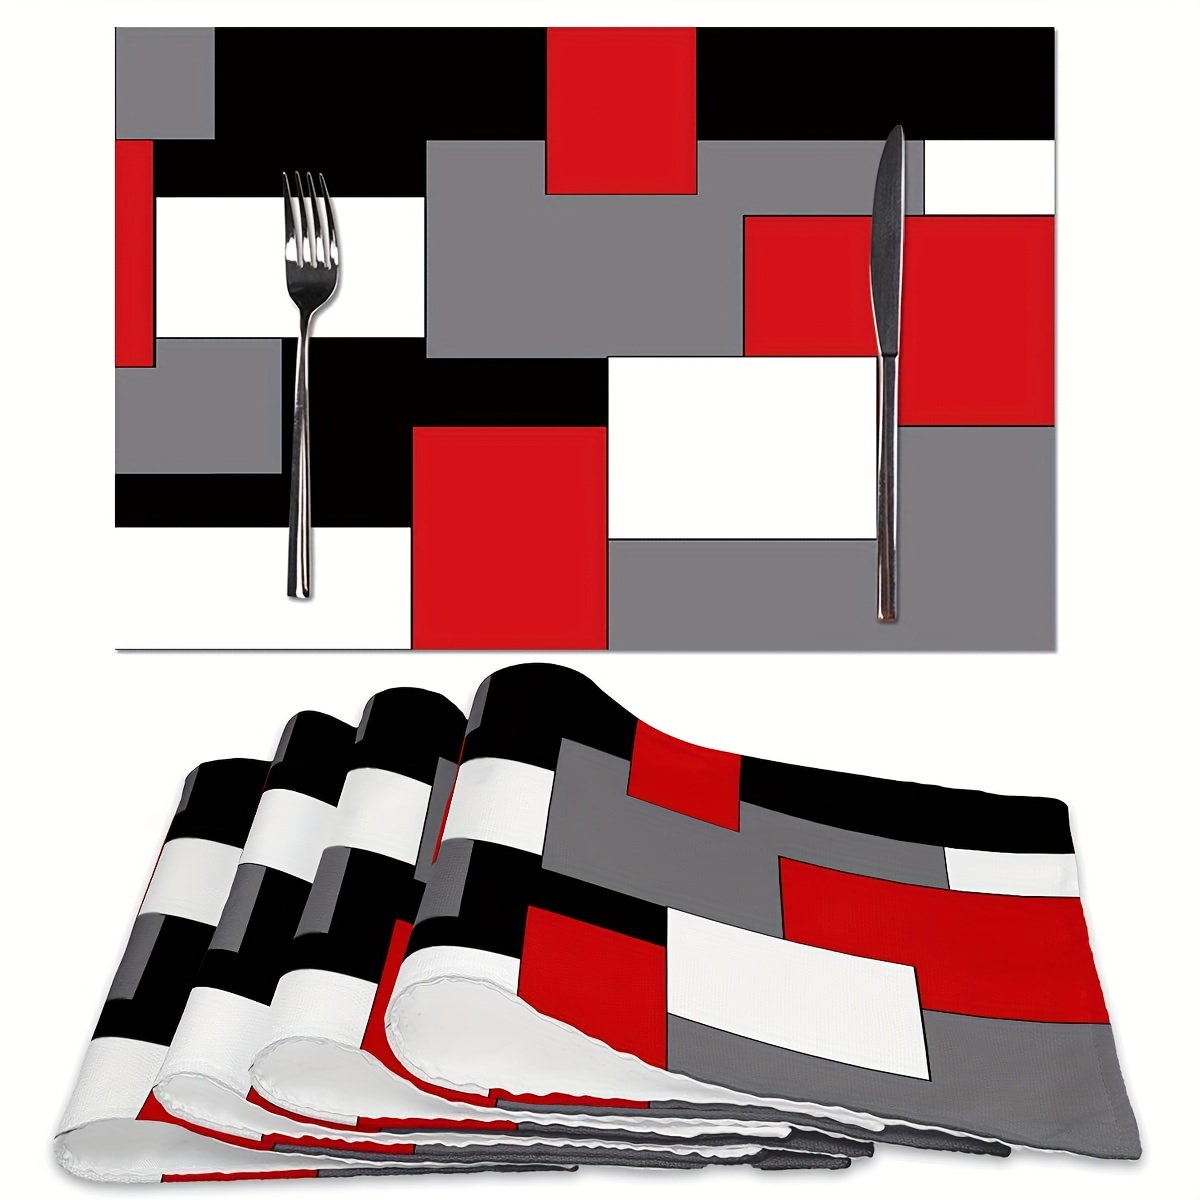 

4pcs Geometric Square Placemats Set, Woven Polyester Washable Dining Table Mats - Machine Washable, Red Grey Black White Rectangle Place Mats For Home Kitchen Decor